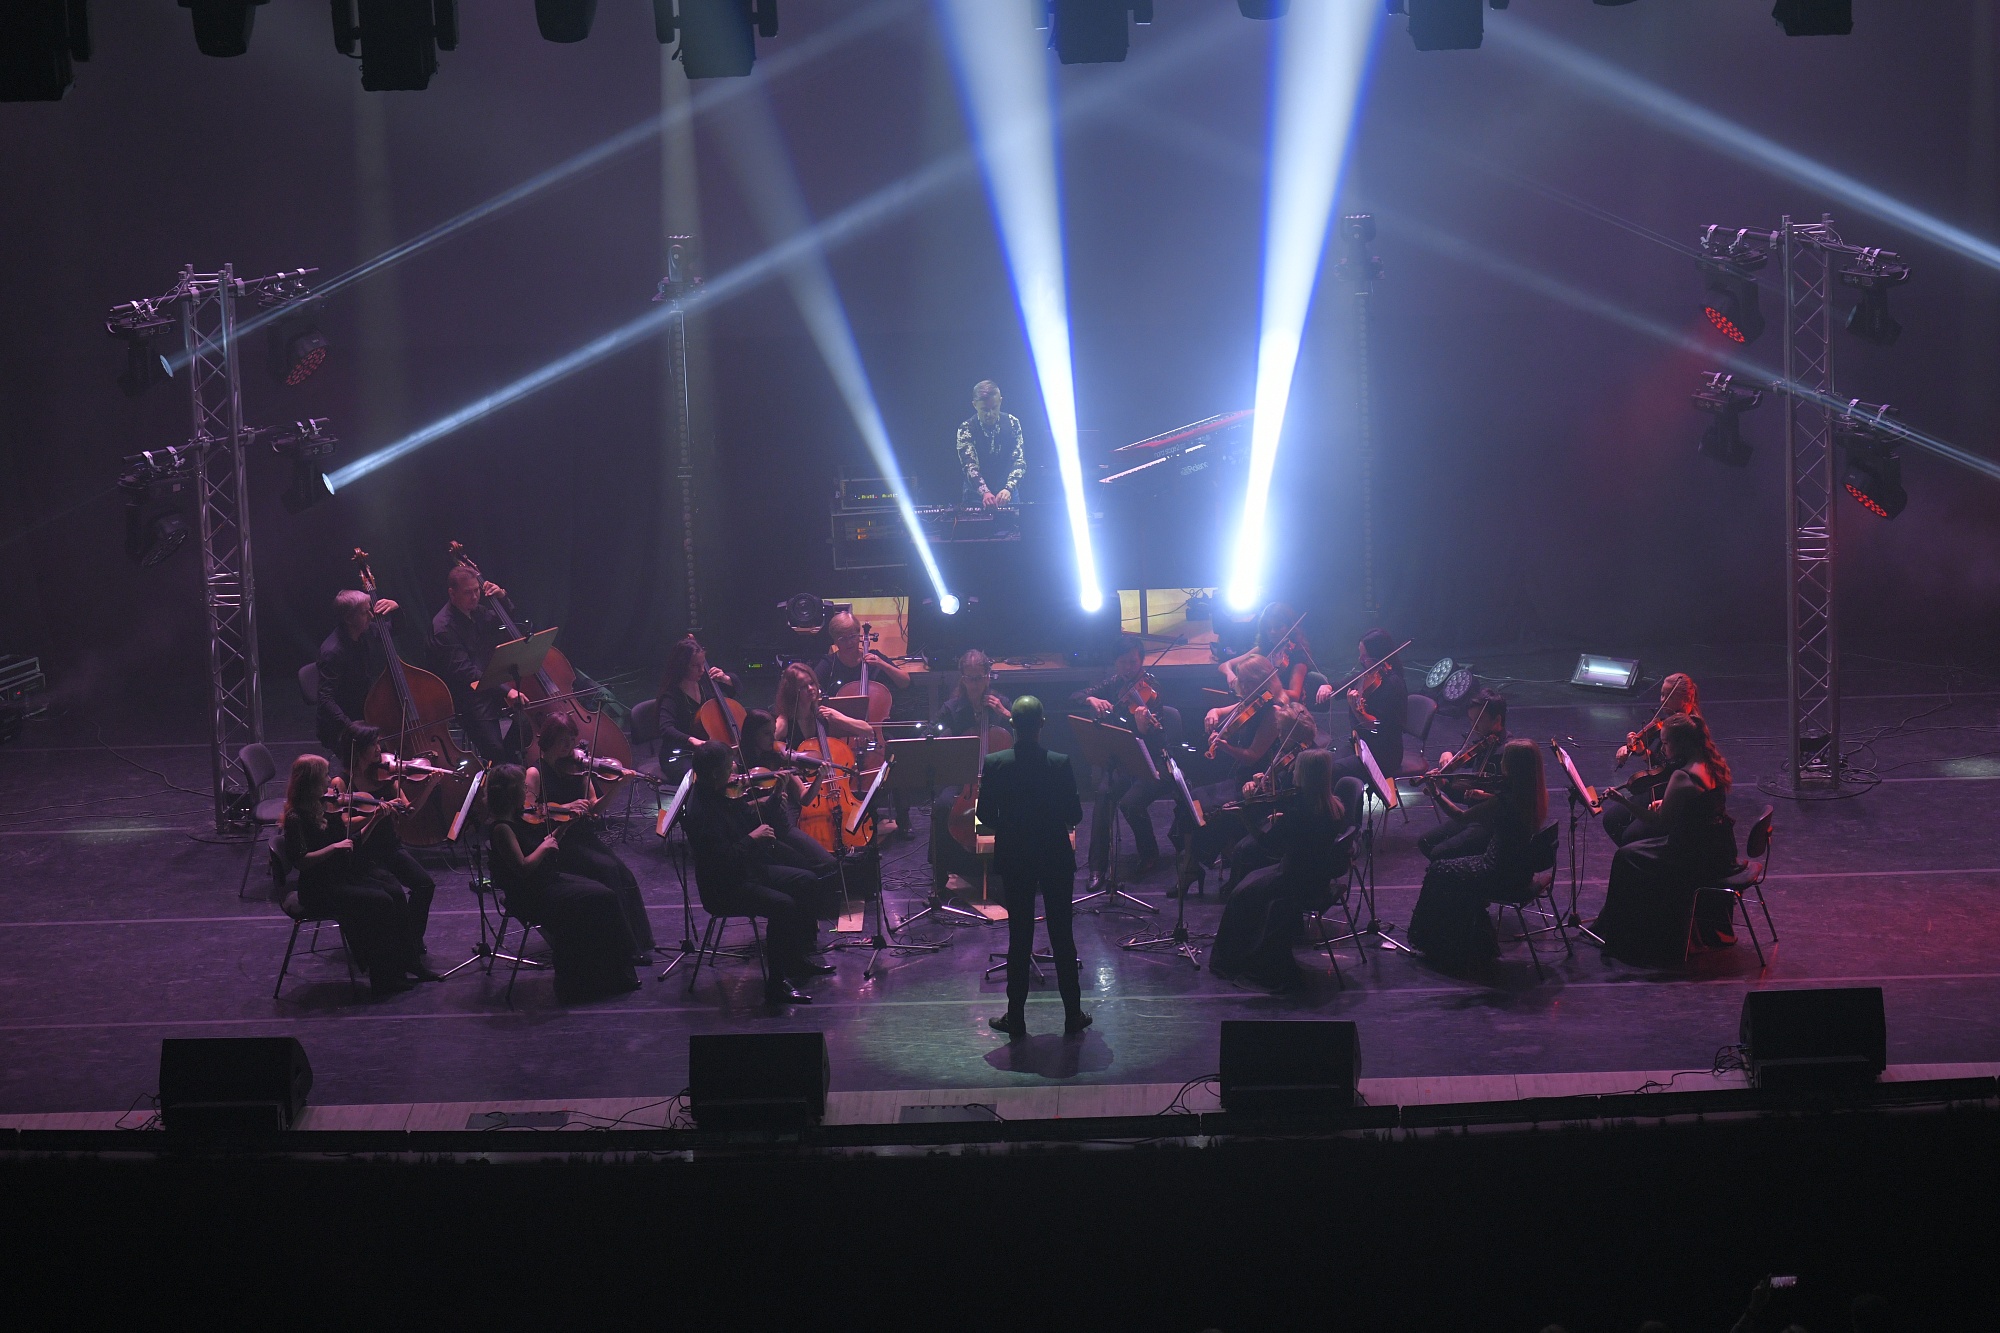 Show orchestra